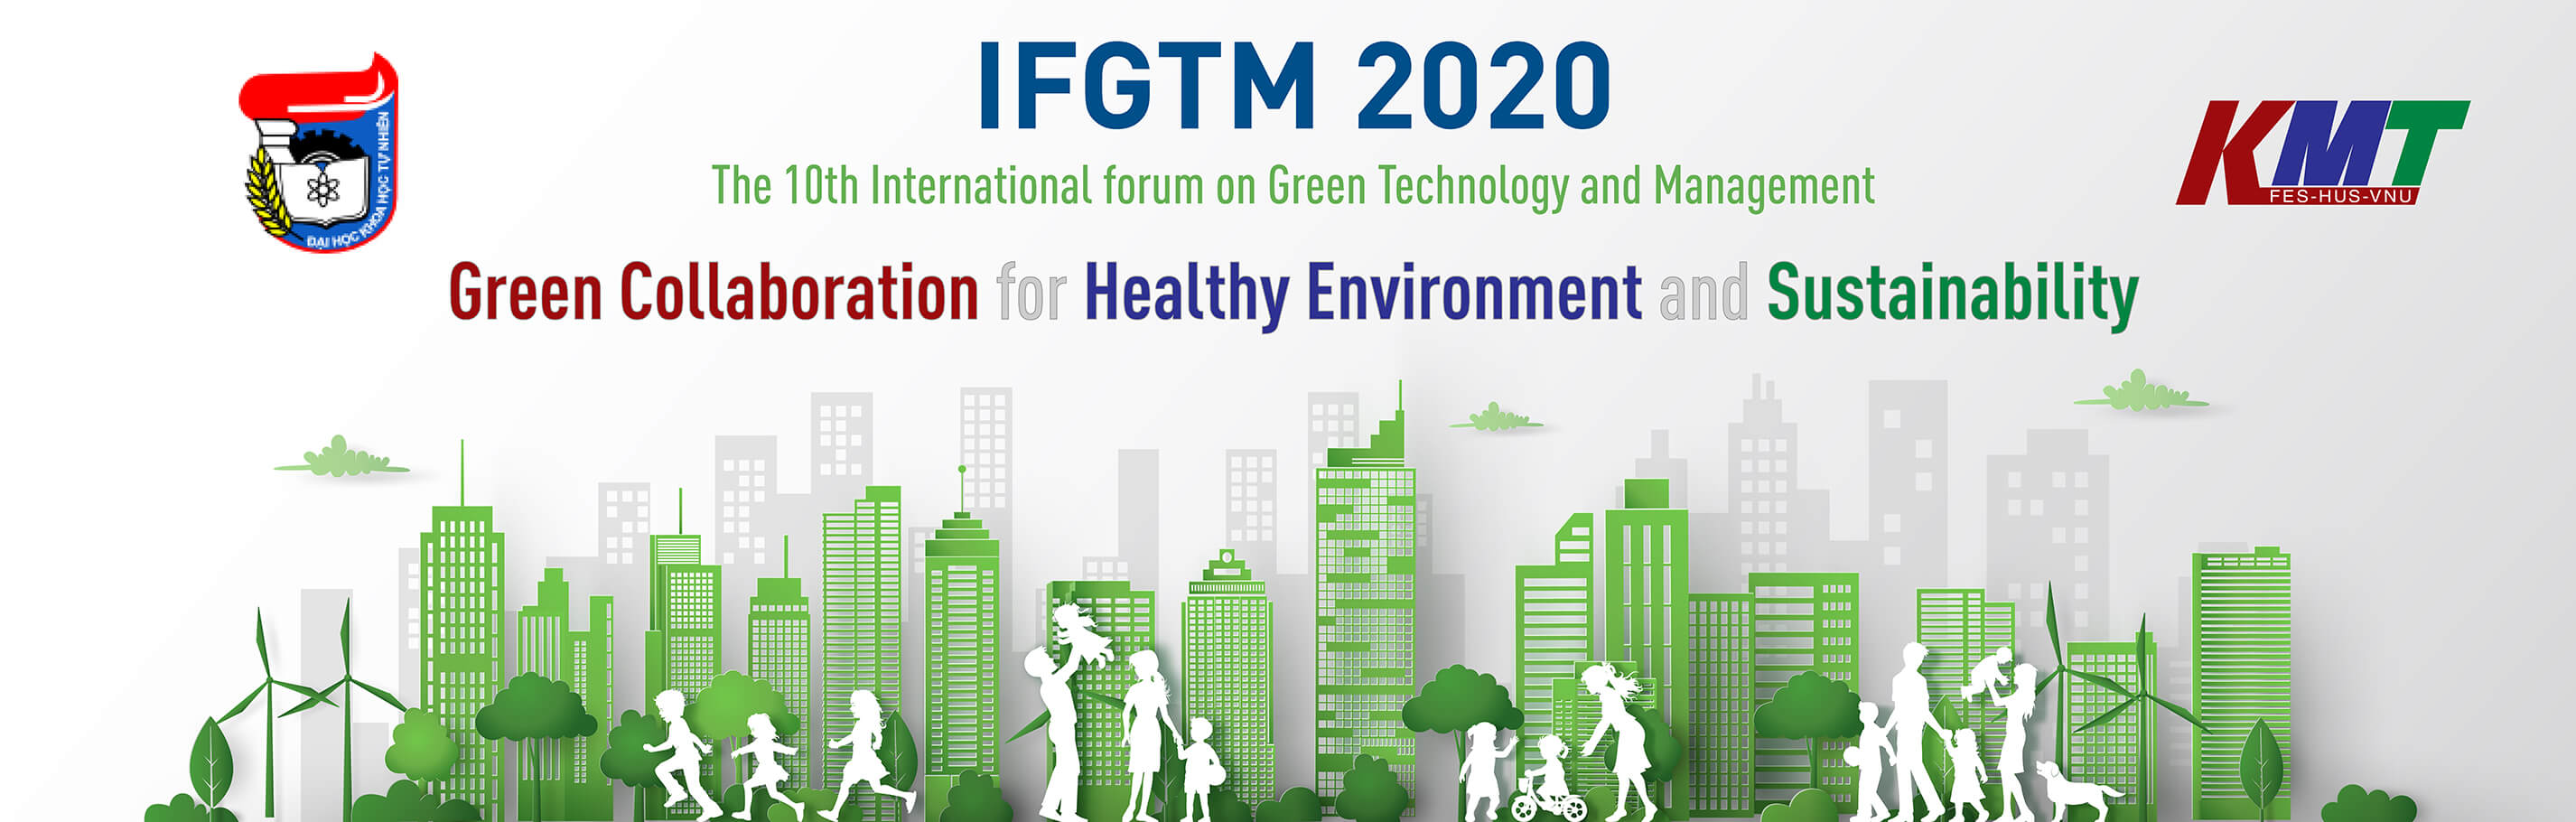 IFGTM2020 - Home Slide Show - 3